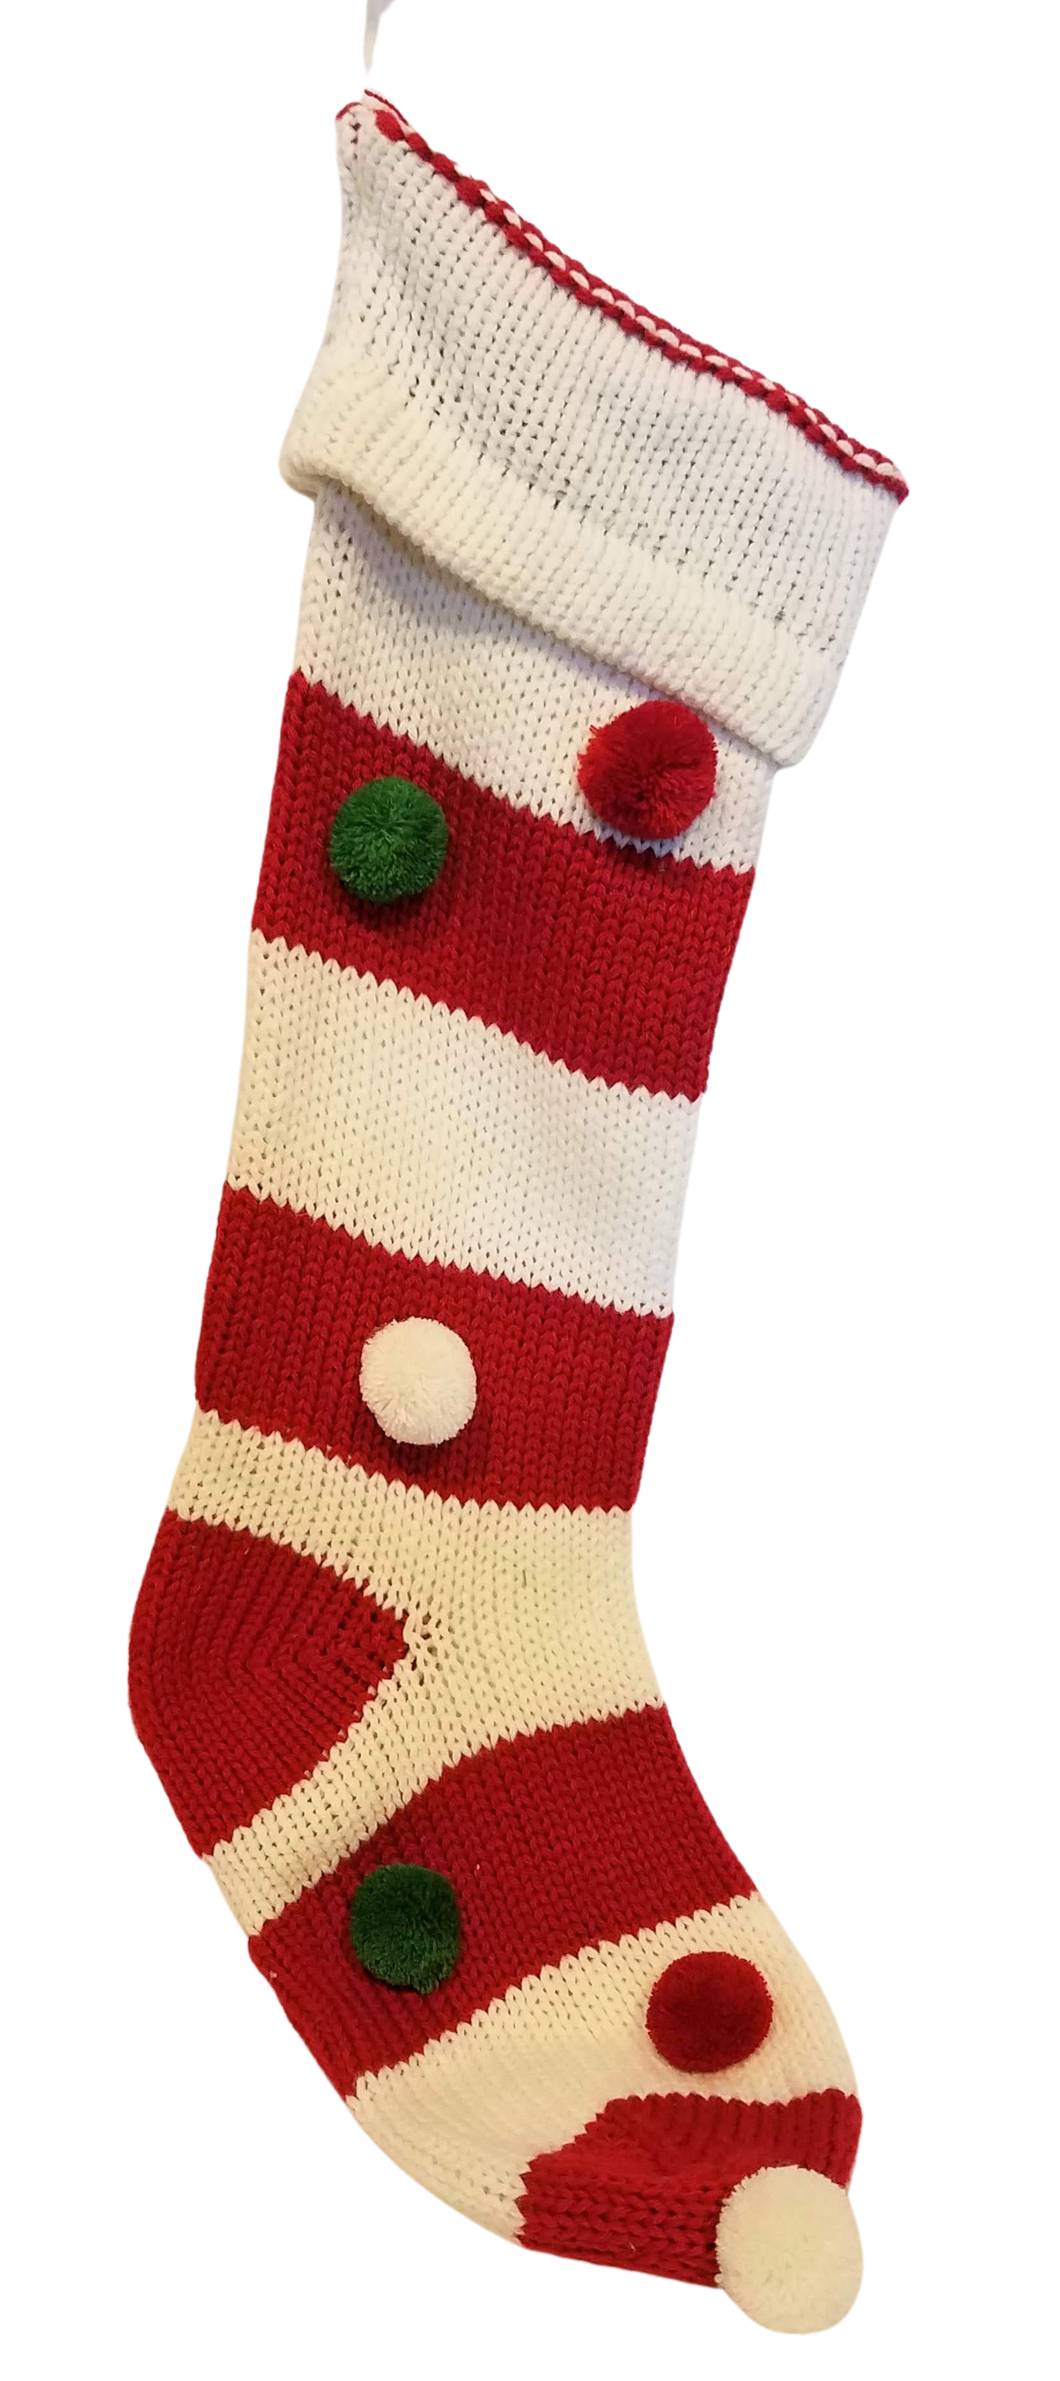 Red/White Knitted Stocking with Red/Green/White Pom Poms 22